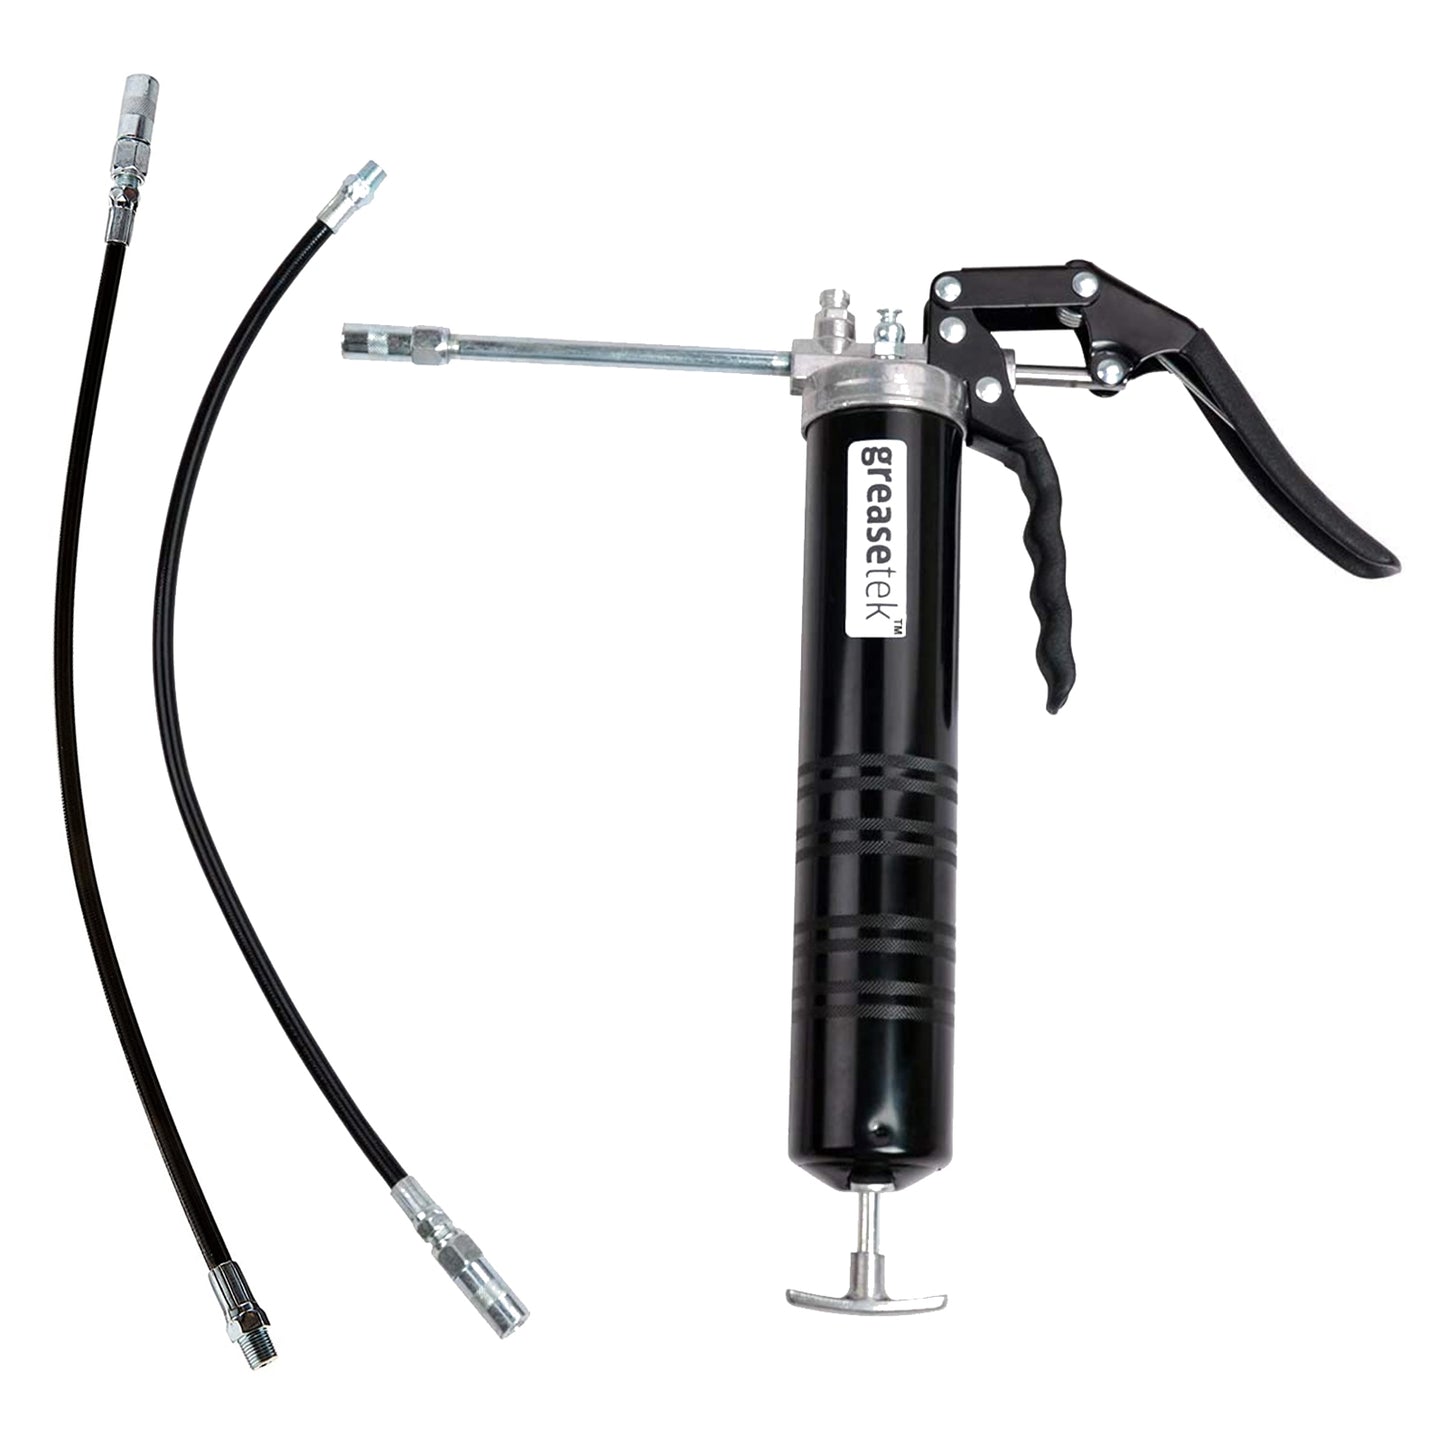 GreaseTek Grease Gun-Pistol 400c.c. with solid extension pipe and 2 Flex hoses with coupler